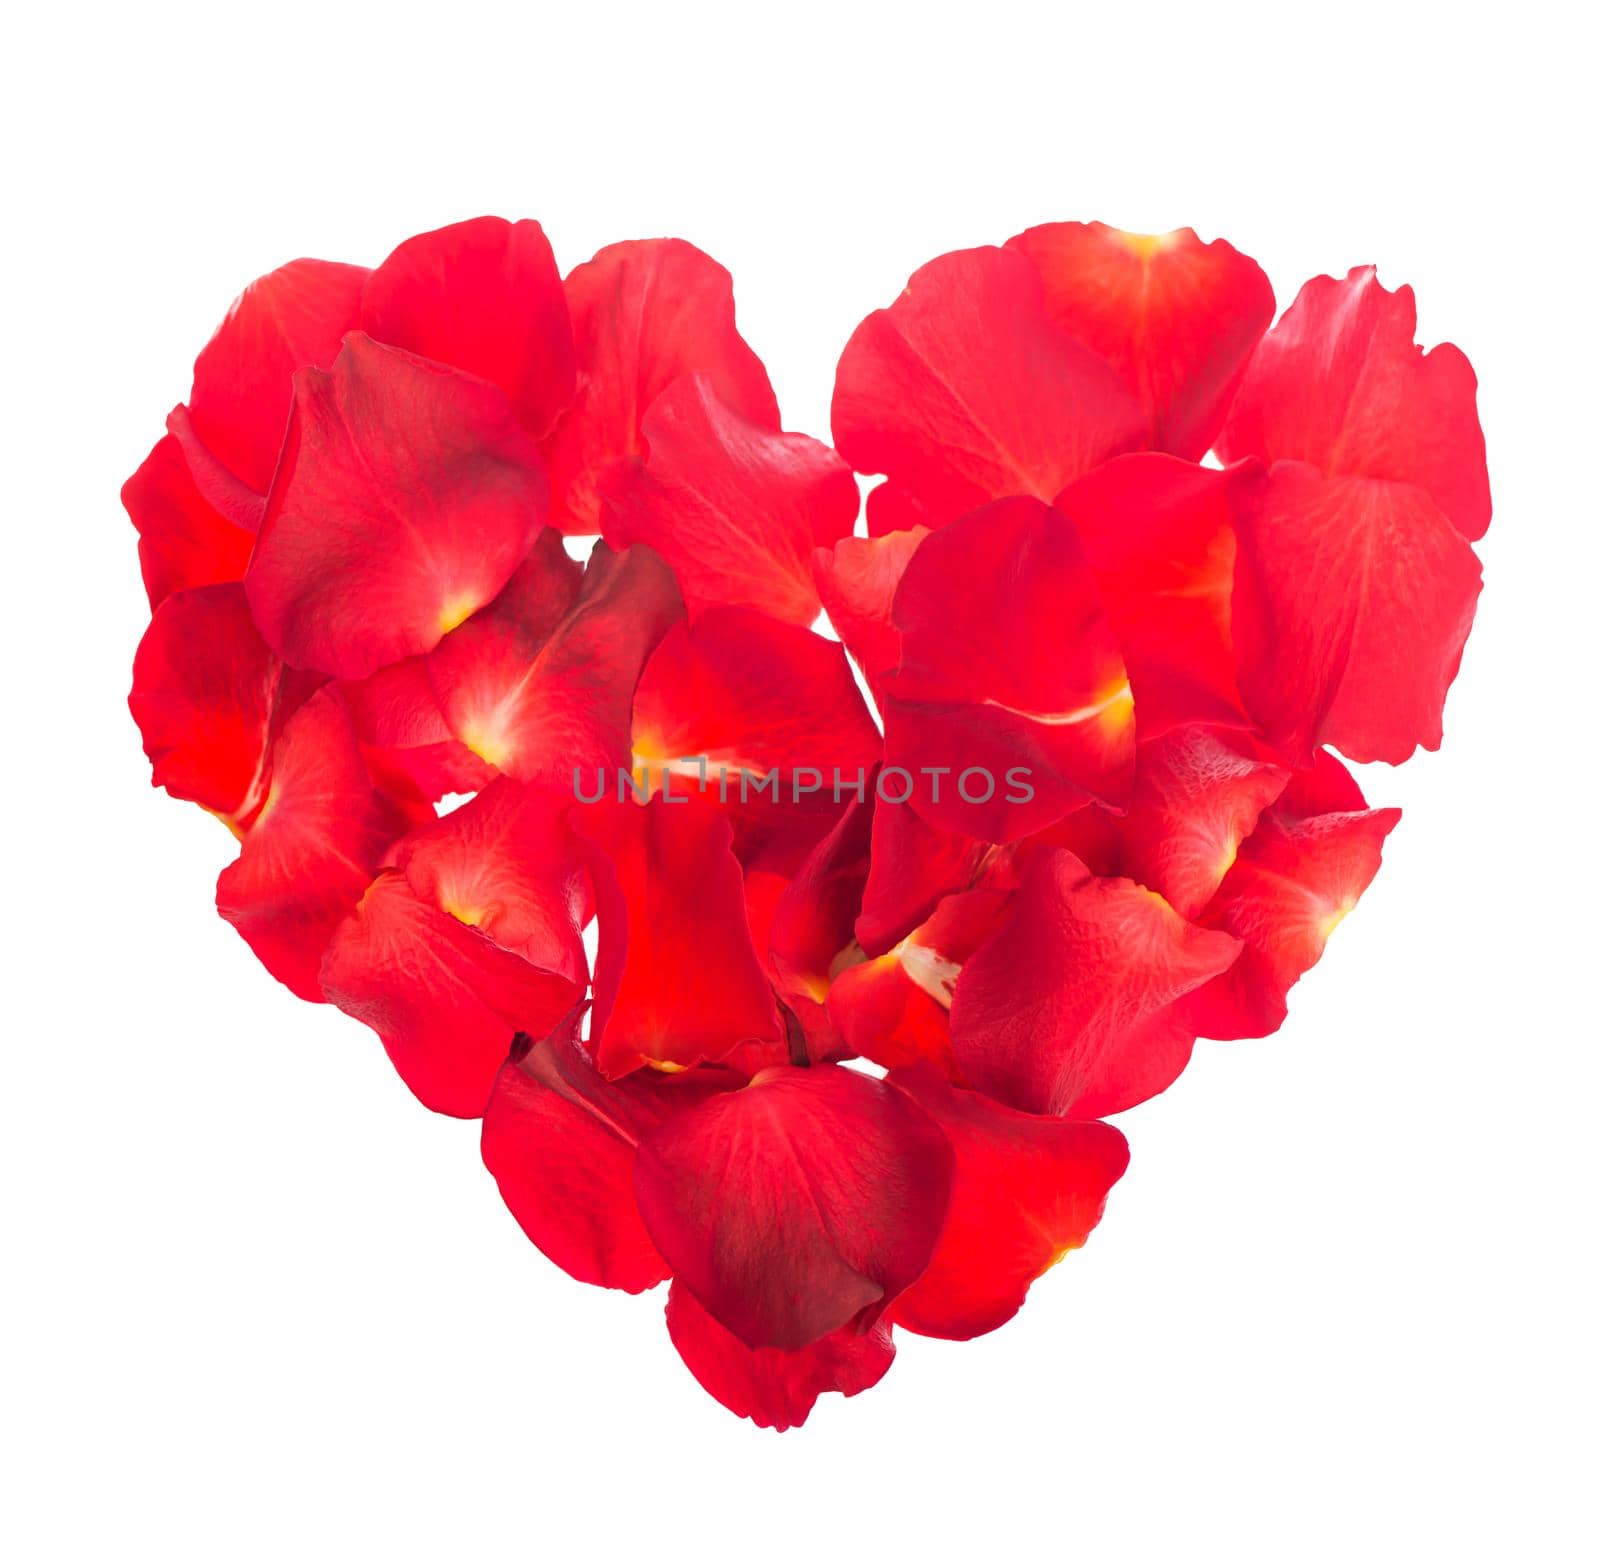 Heart Made of Red Roses Isolated on the white background by aprilphoto